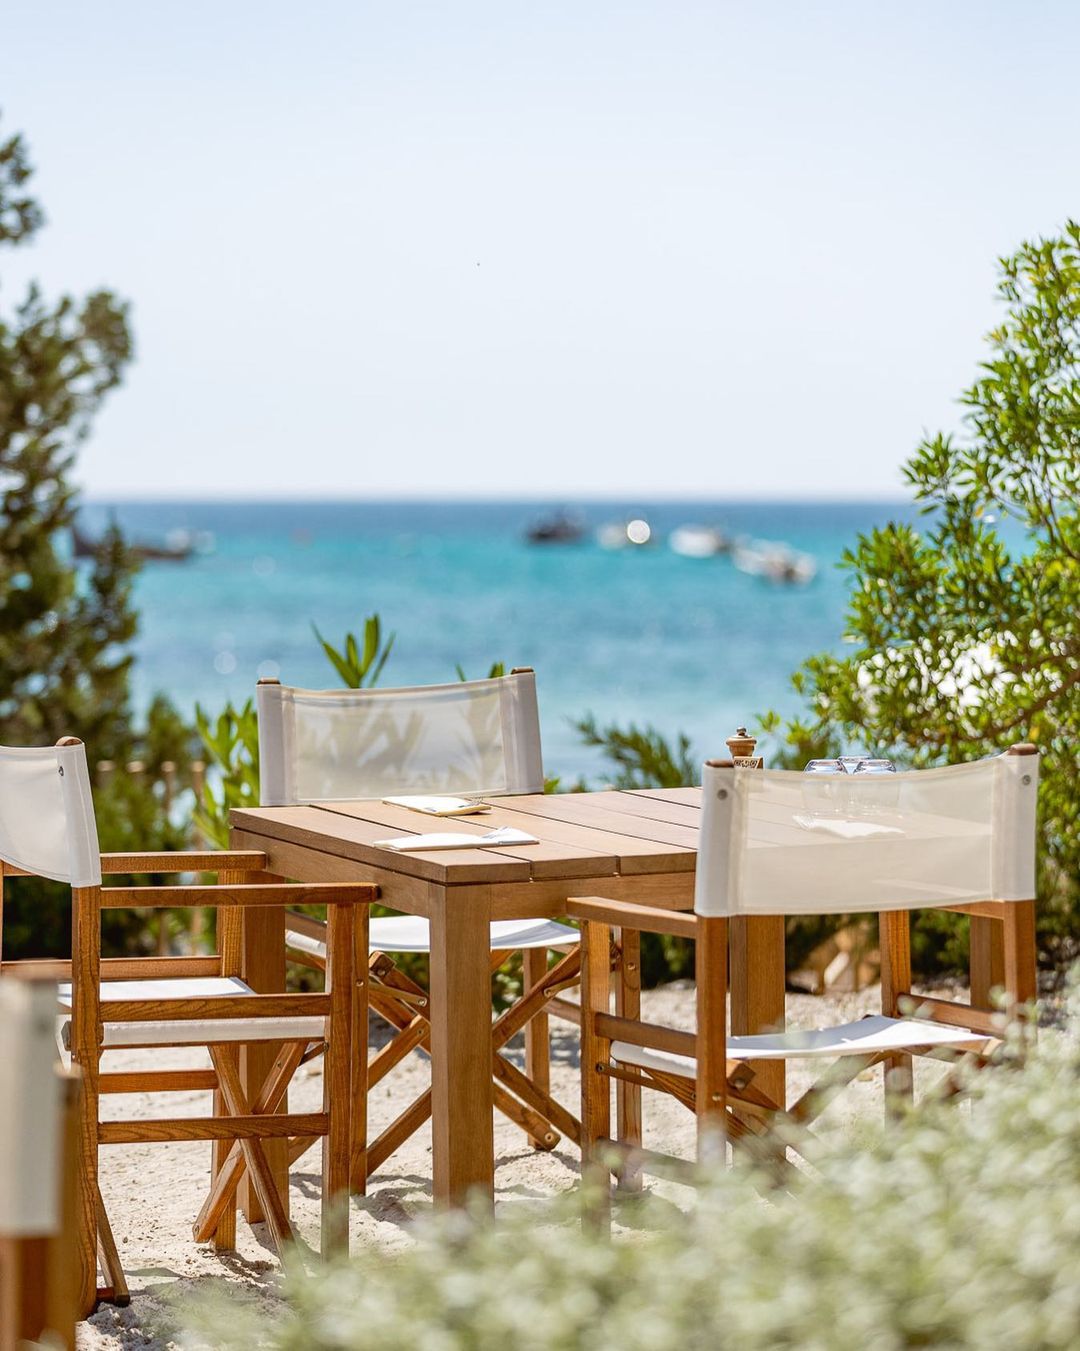 Seaside Serenity for a Delightful Lunch Experience - Best Beach Clubs and Bars in Corsica